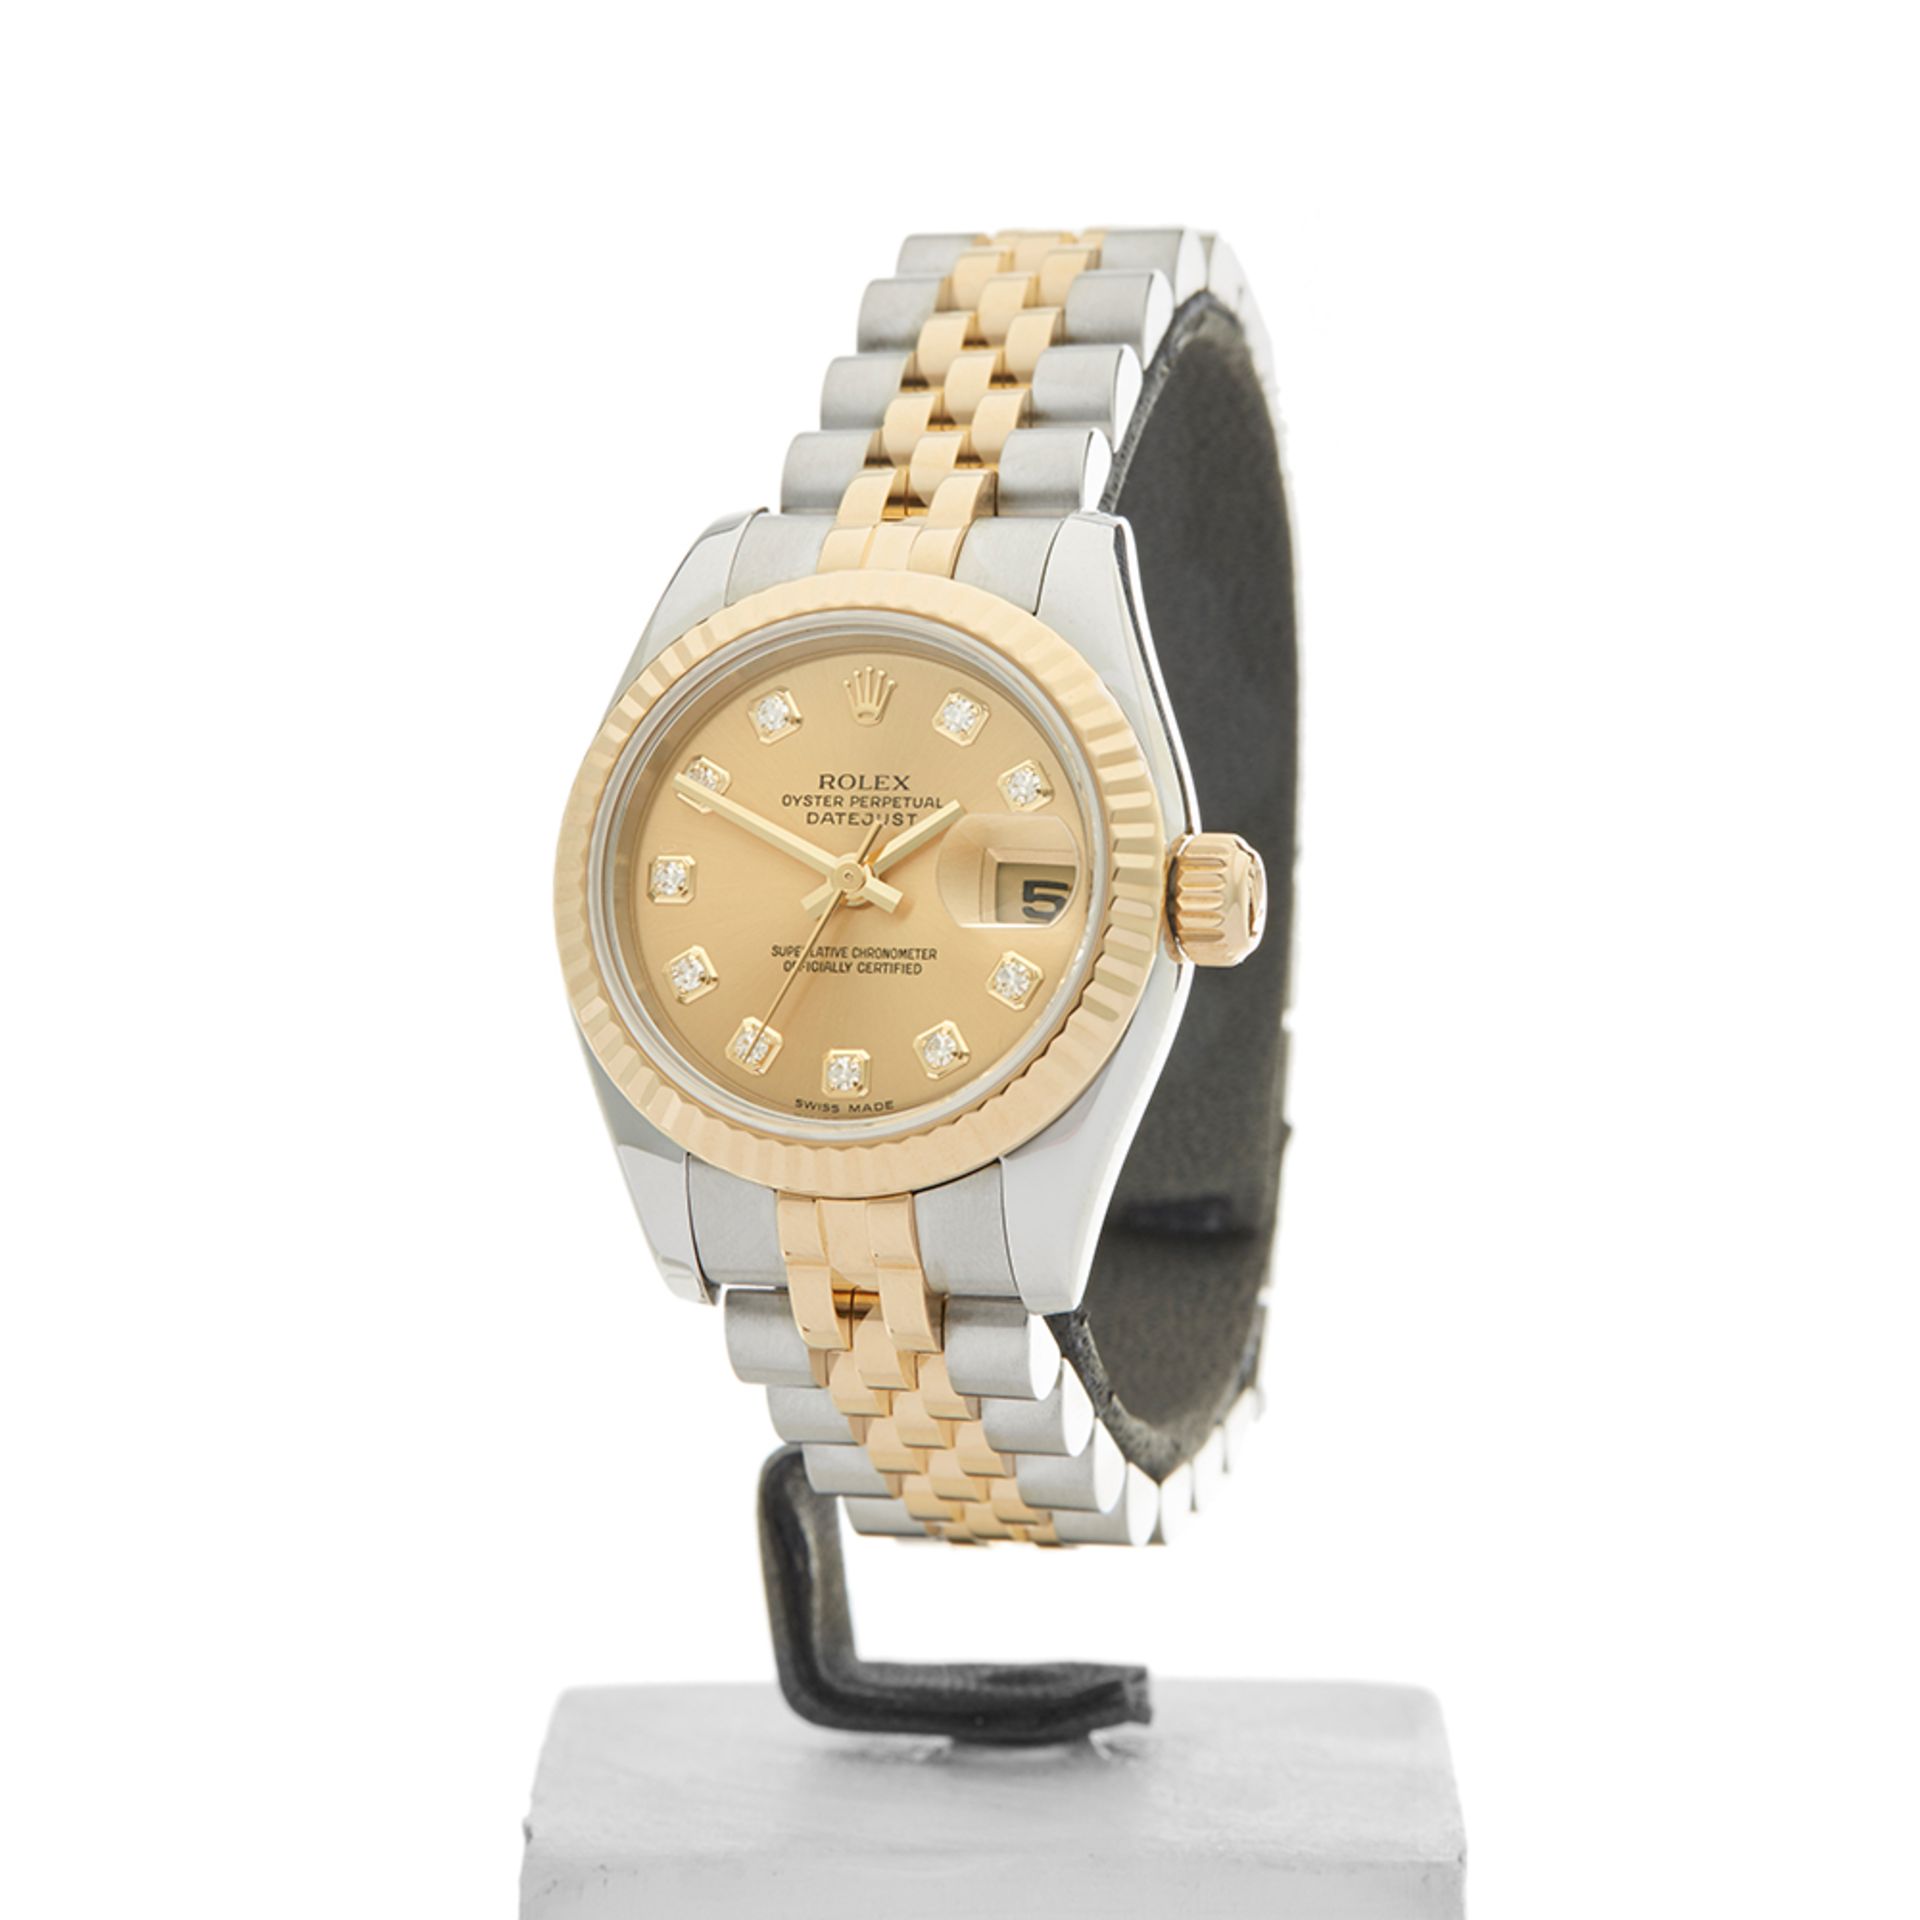 Datejust 26mm Stainless Steel & 18k Yellow Gold - 179173